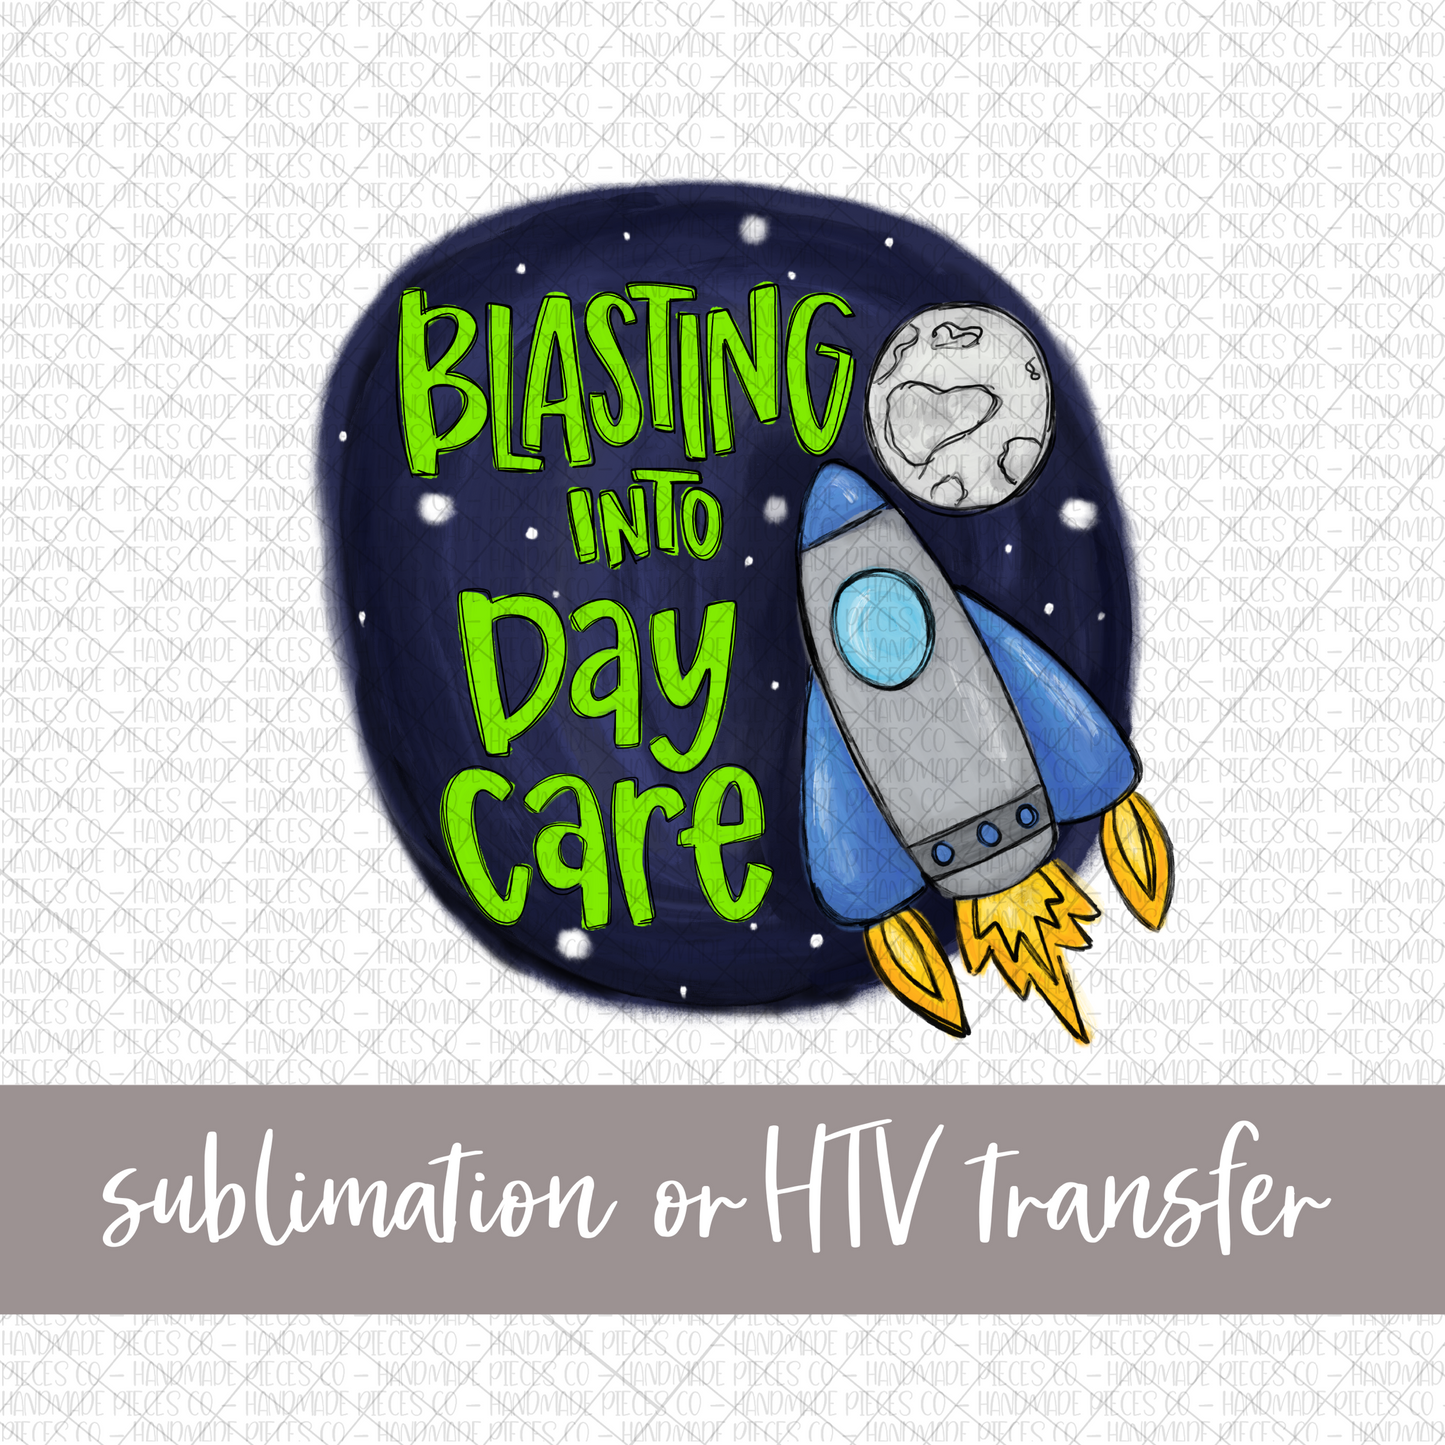 Blasting into Daycare - Sublimation or HTV Transfer